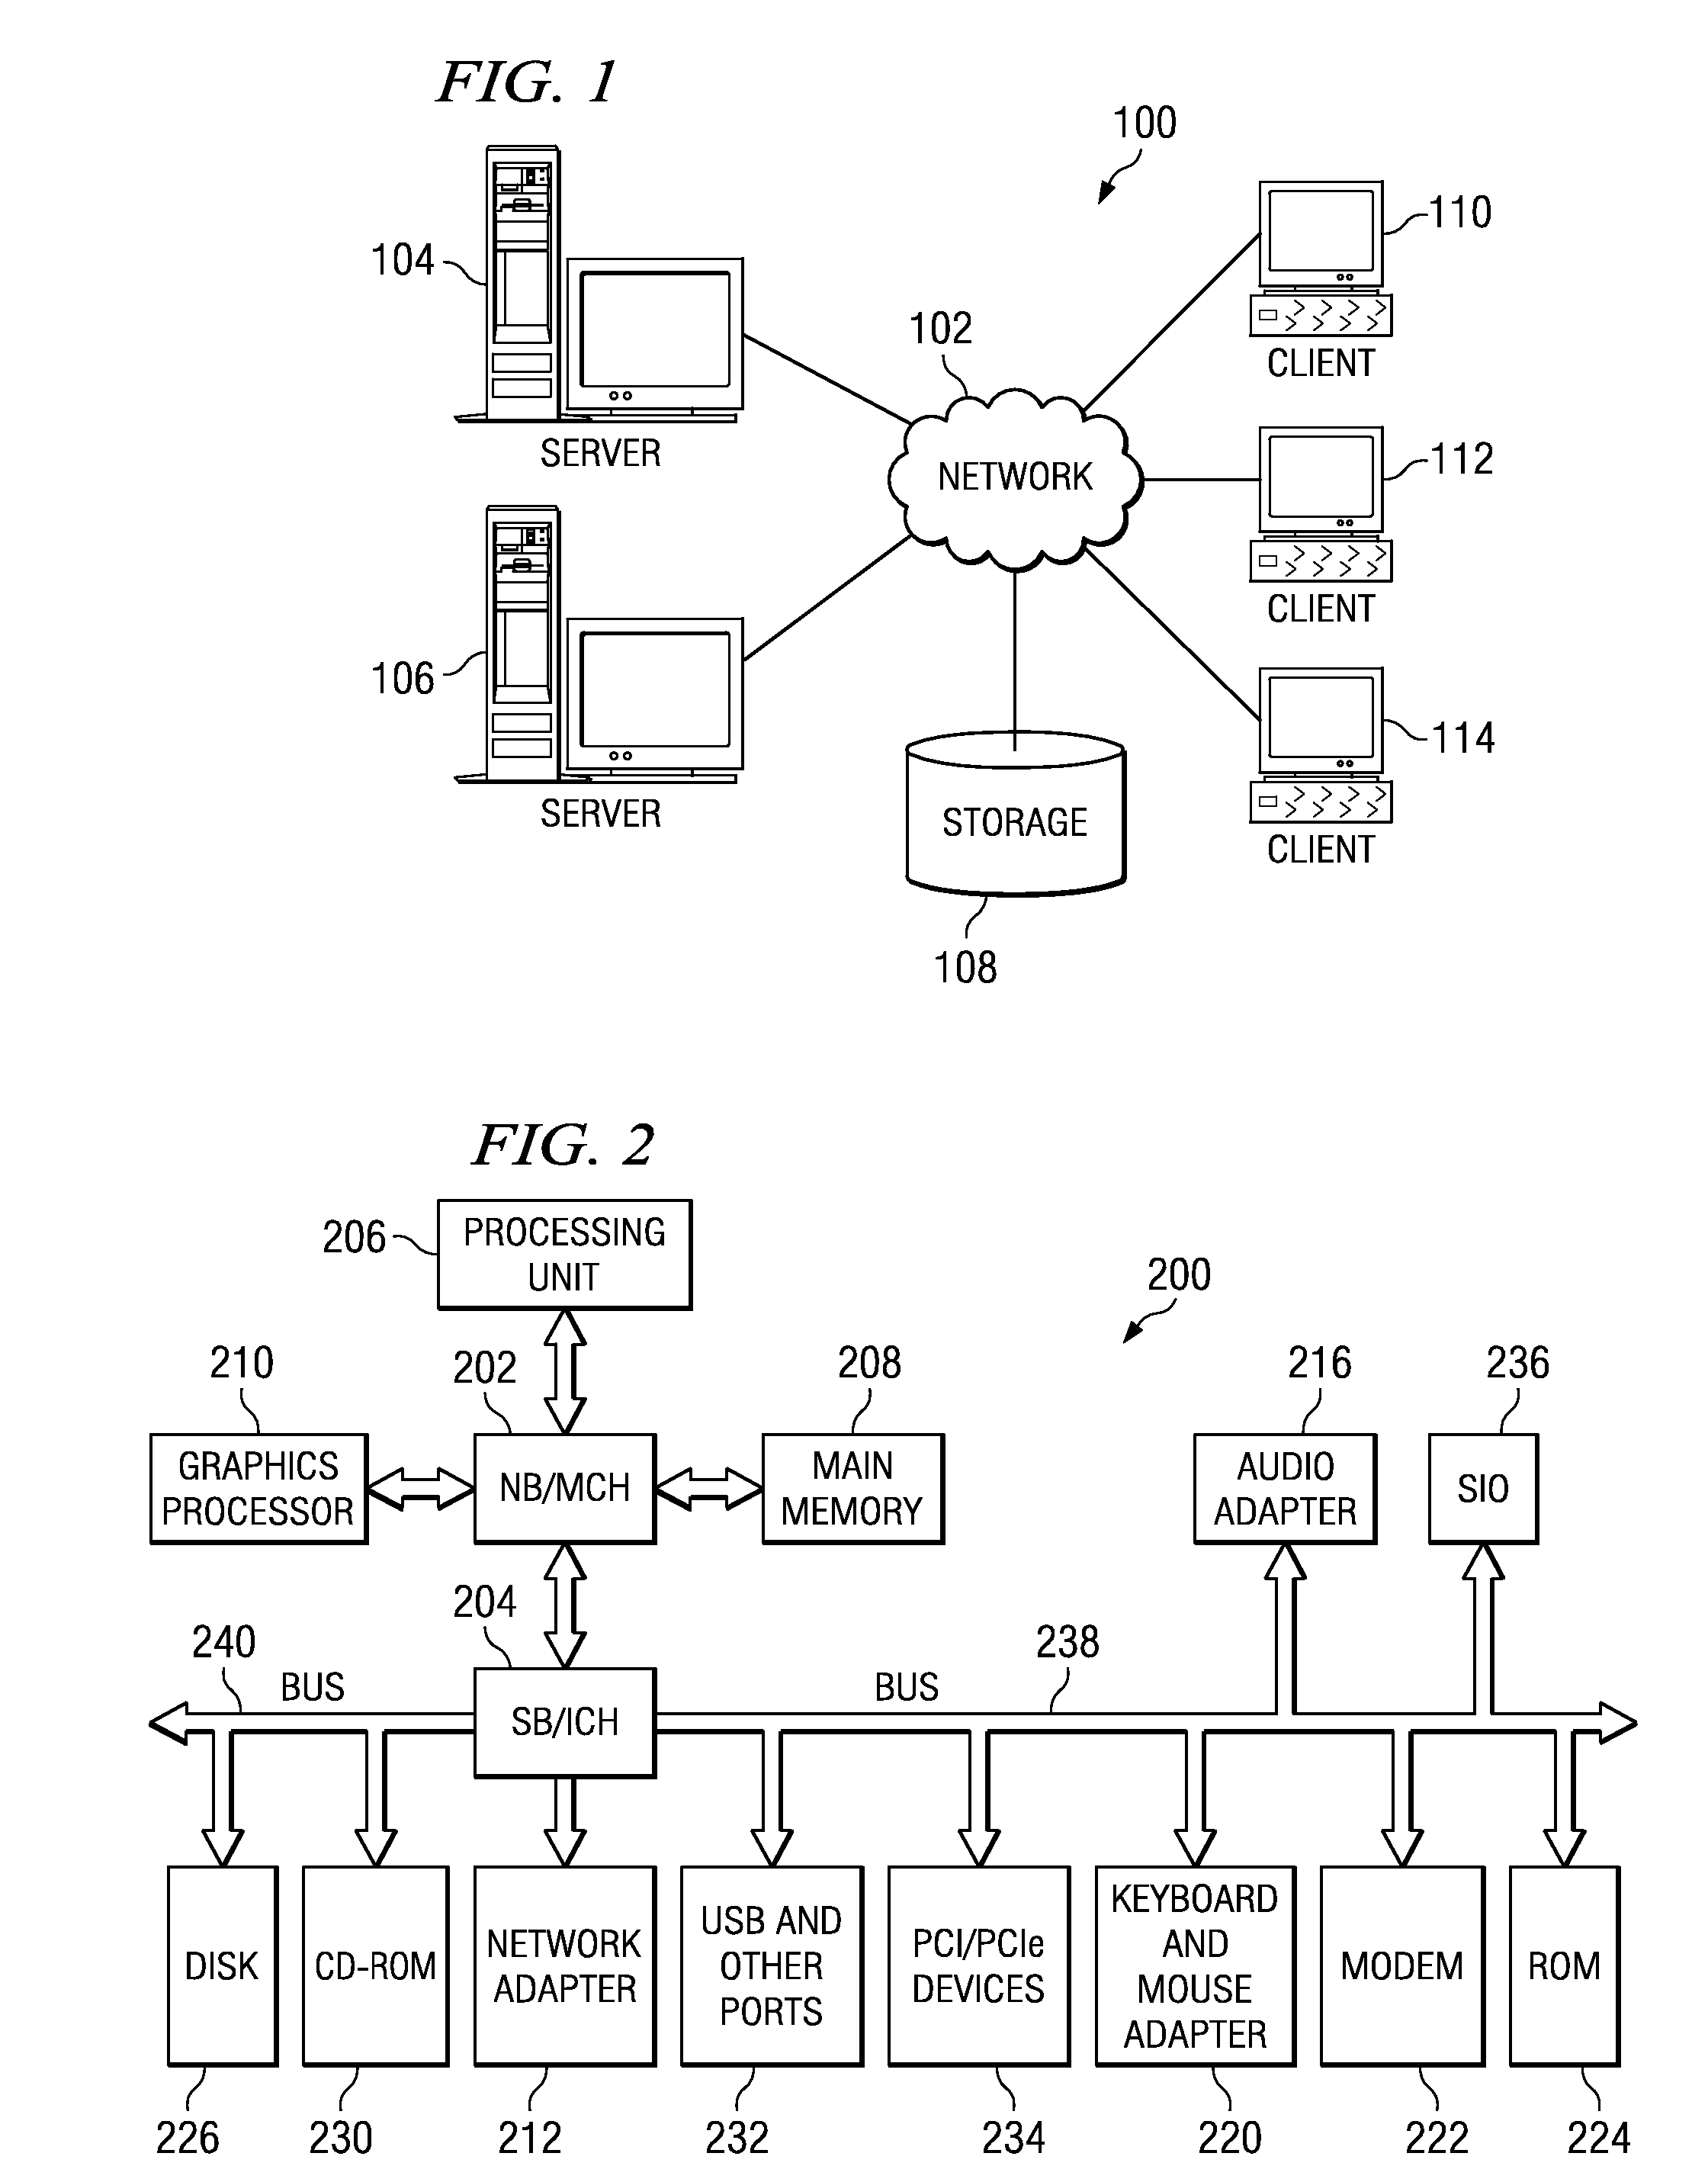 System and method for a multiple disciplinary normalization of source for metadata integration with etl processing layer of complex data across multiple claim engine sources in support of the creation of universal/enterprise healthcare claims record